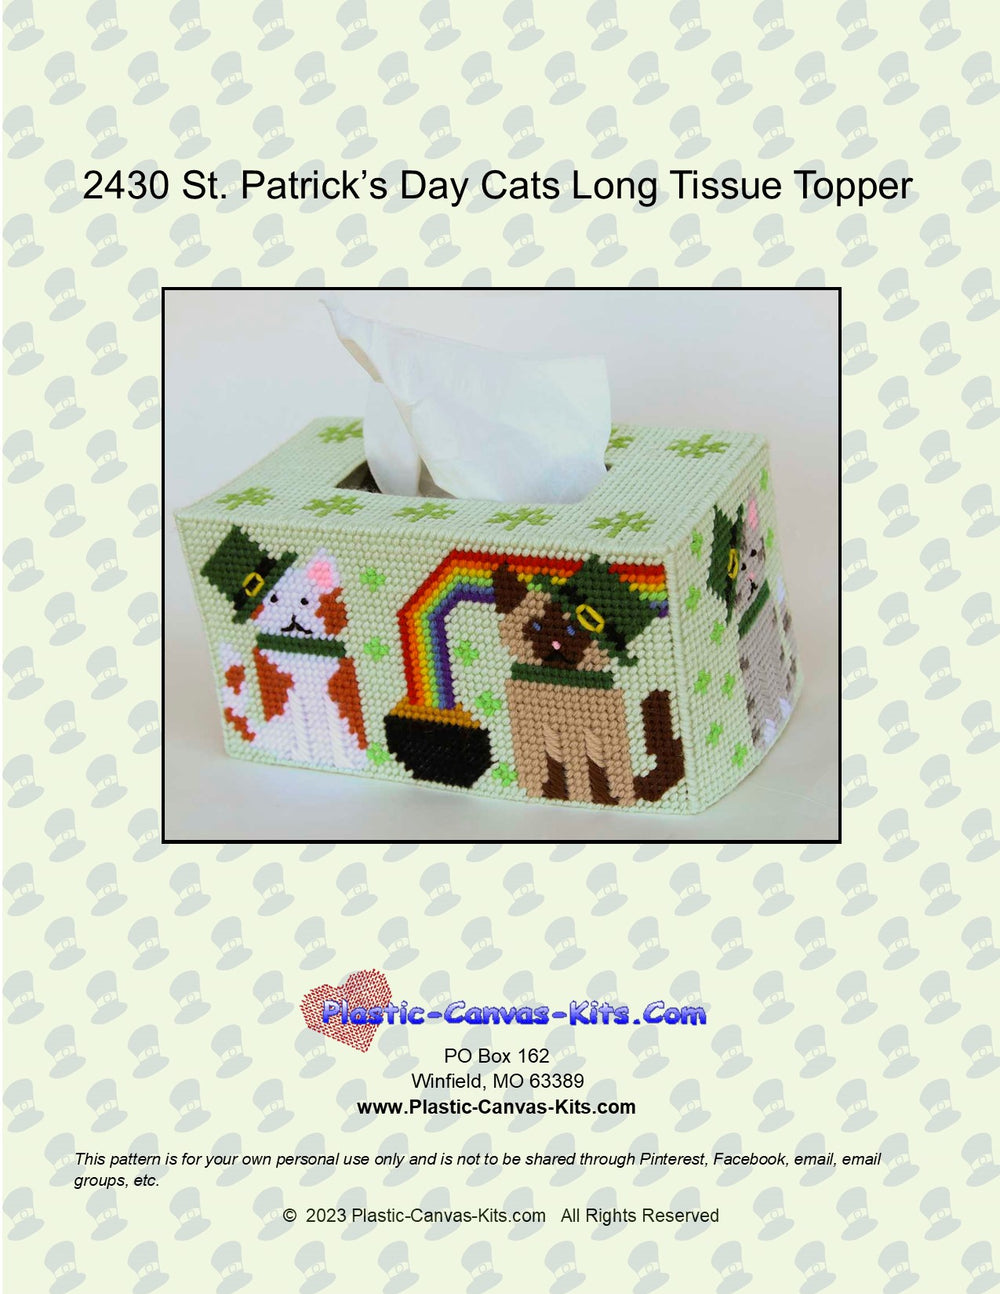 St. Patrick's Day Cats Long Tissue Topper